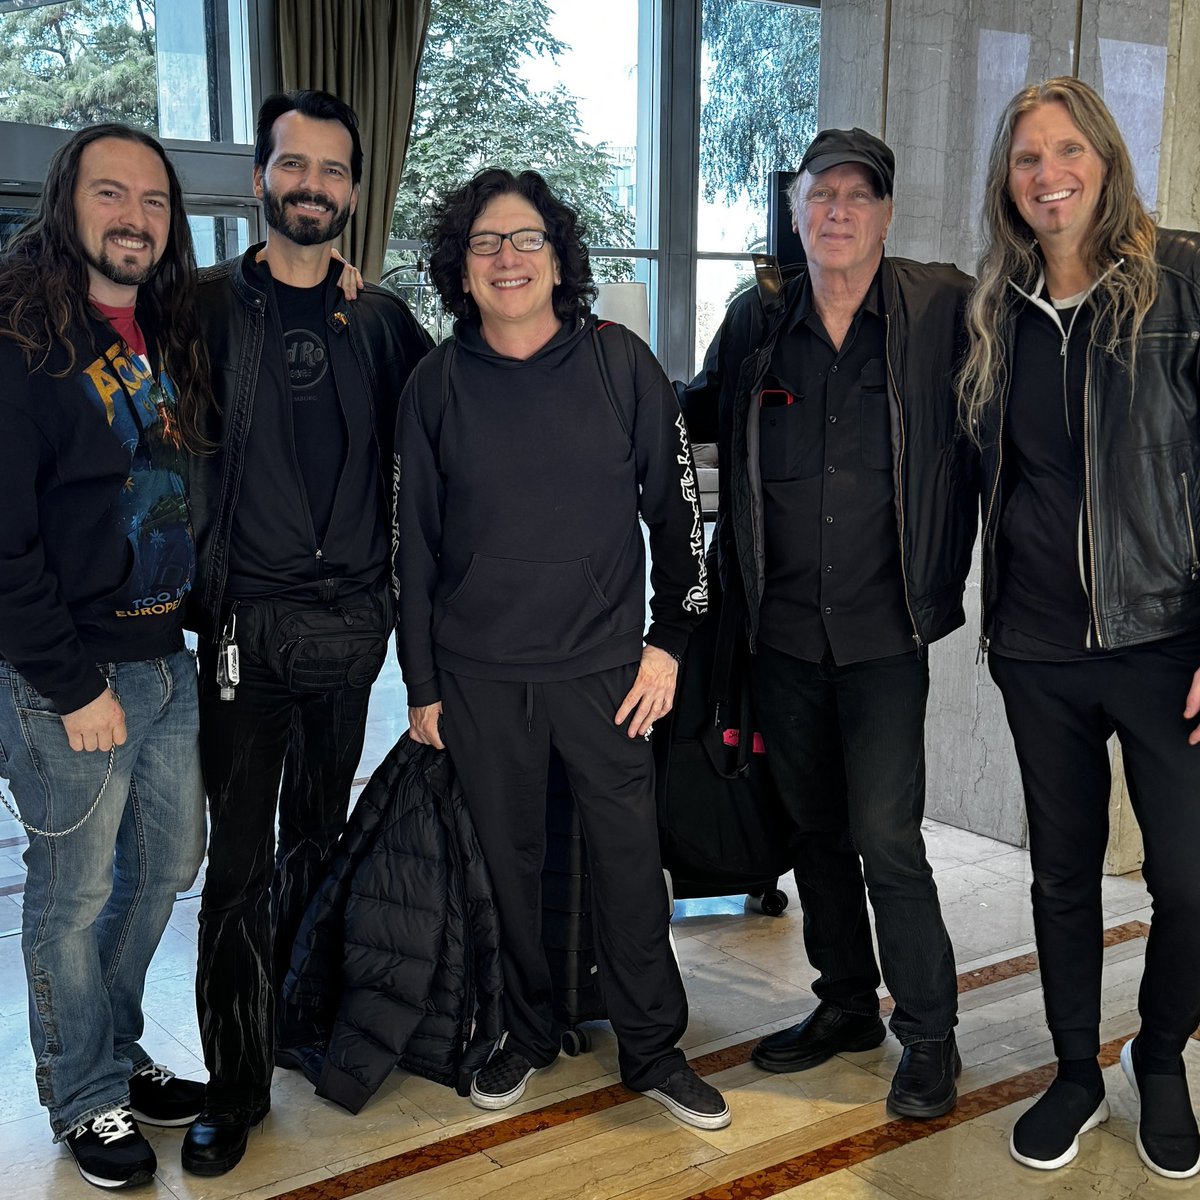 Checking in to our hotel in Santiago, Chile today, it was a fun surprise to run into Eric Martin and Billy Sheehan of Mr Big checking out! Also had the pleasure of meeting Paul Gilbert for the first time.